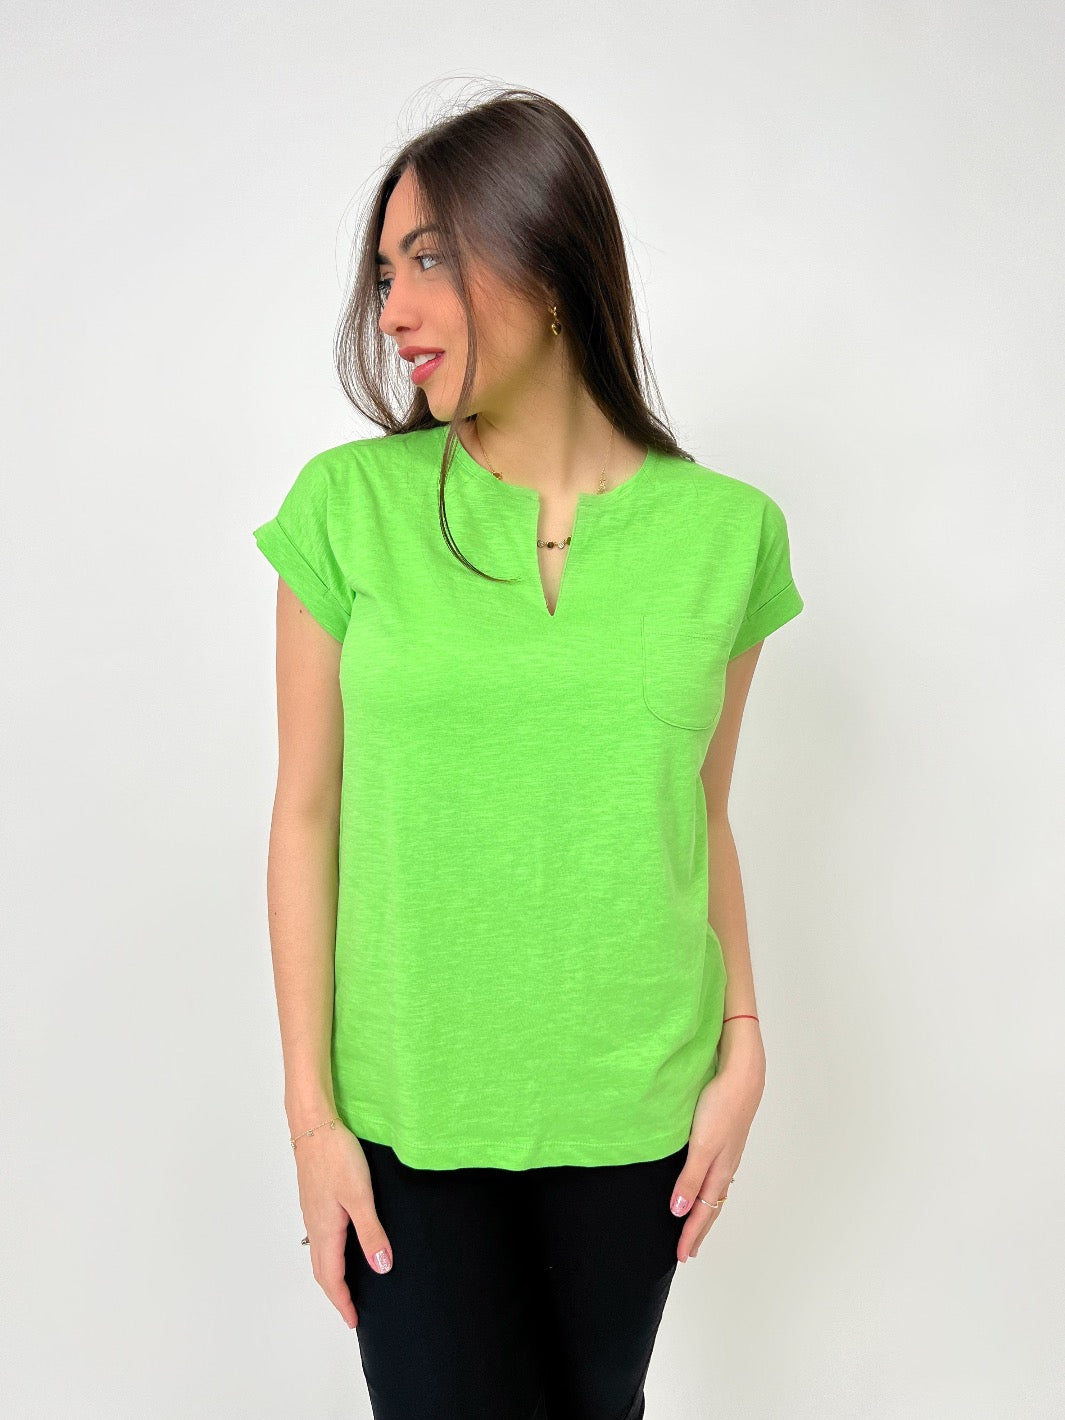 Freequent Top With Pocket In Lime Green-Nicola Ross